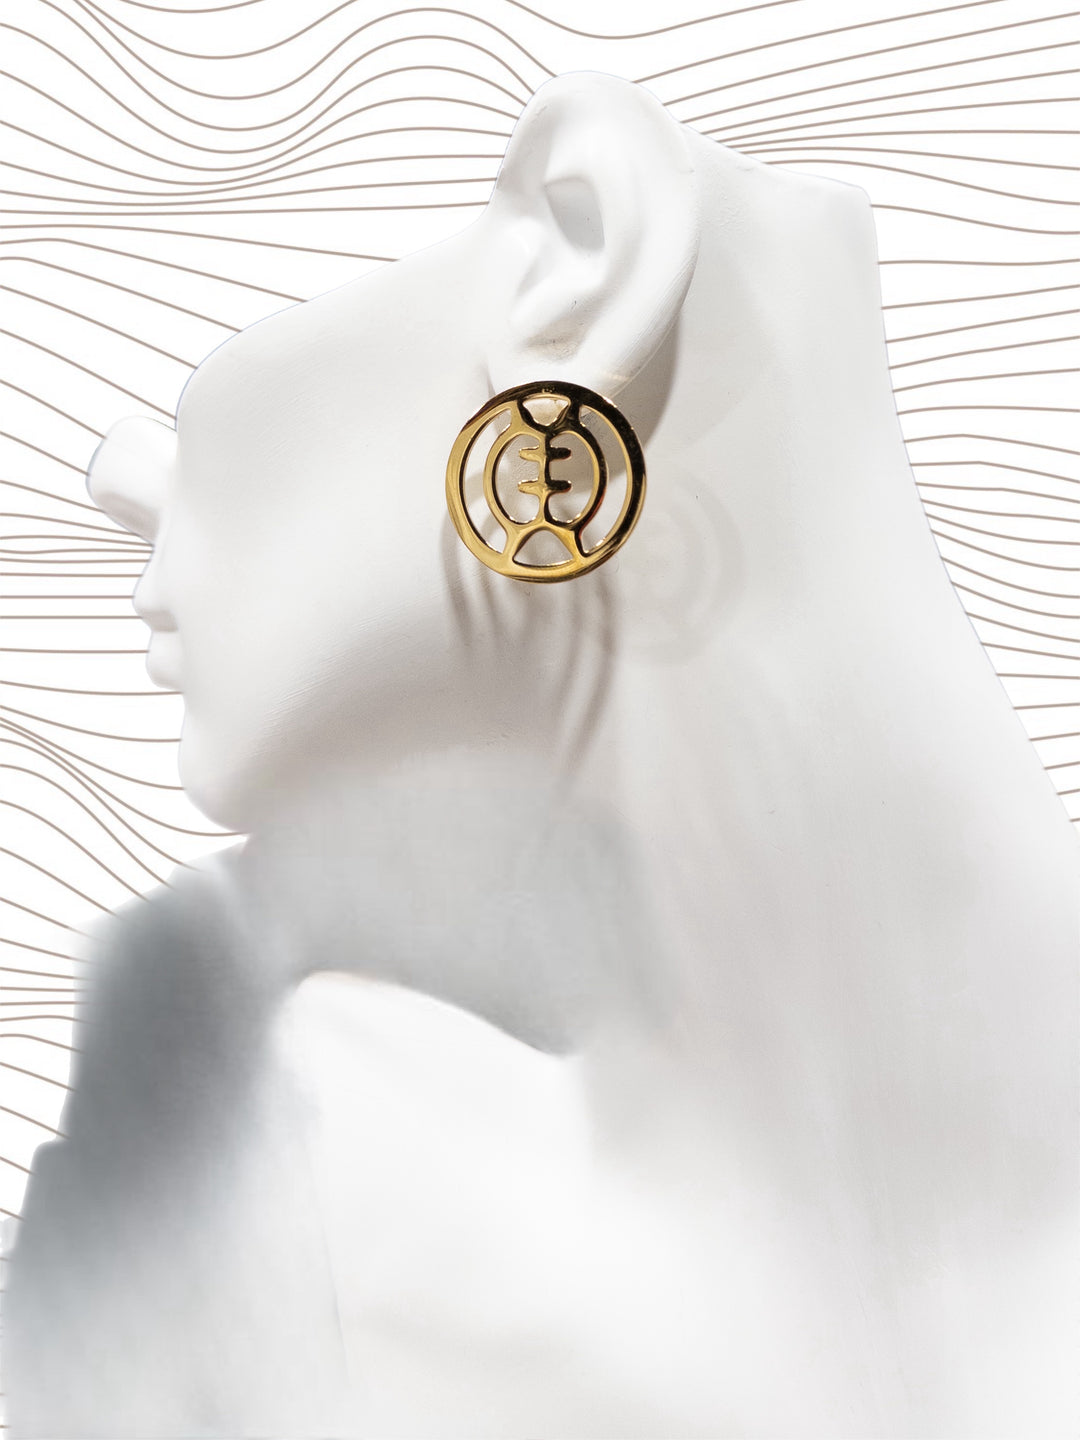 Afro Symbol Gold plated earring